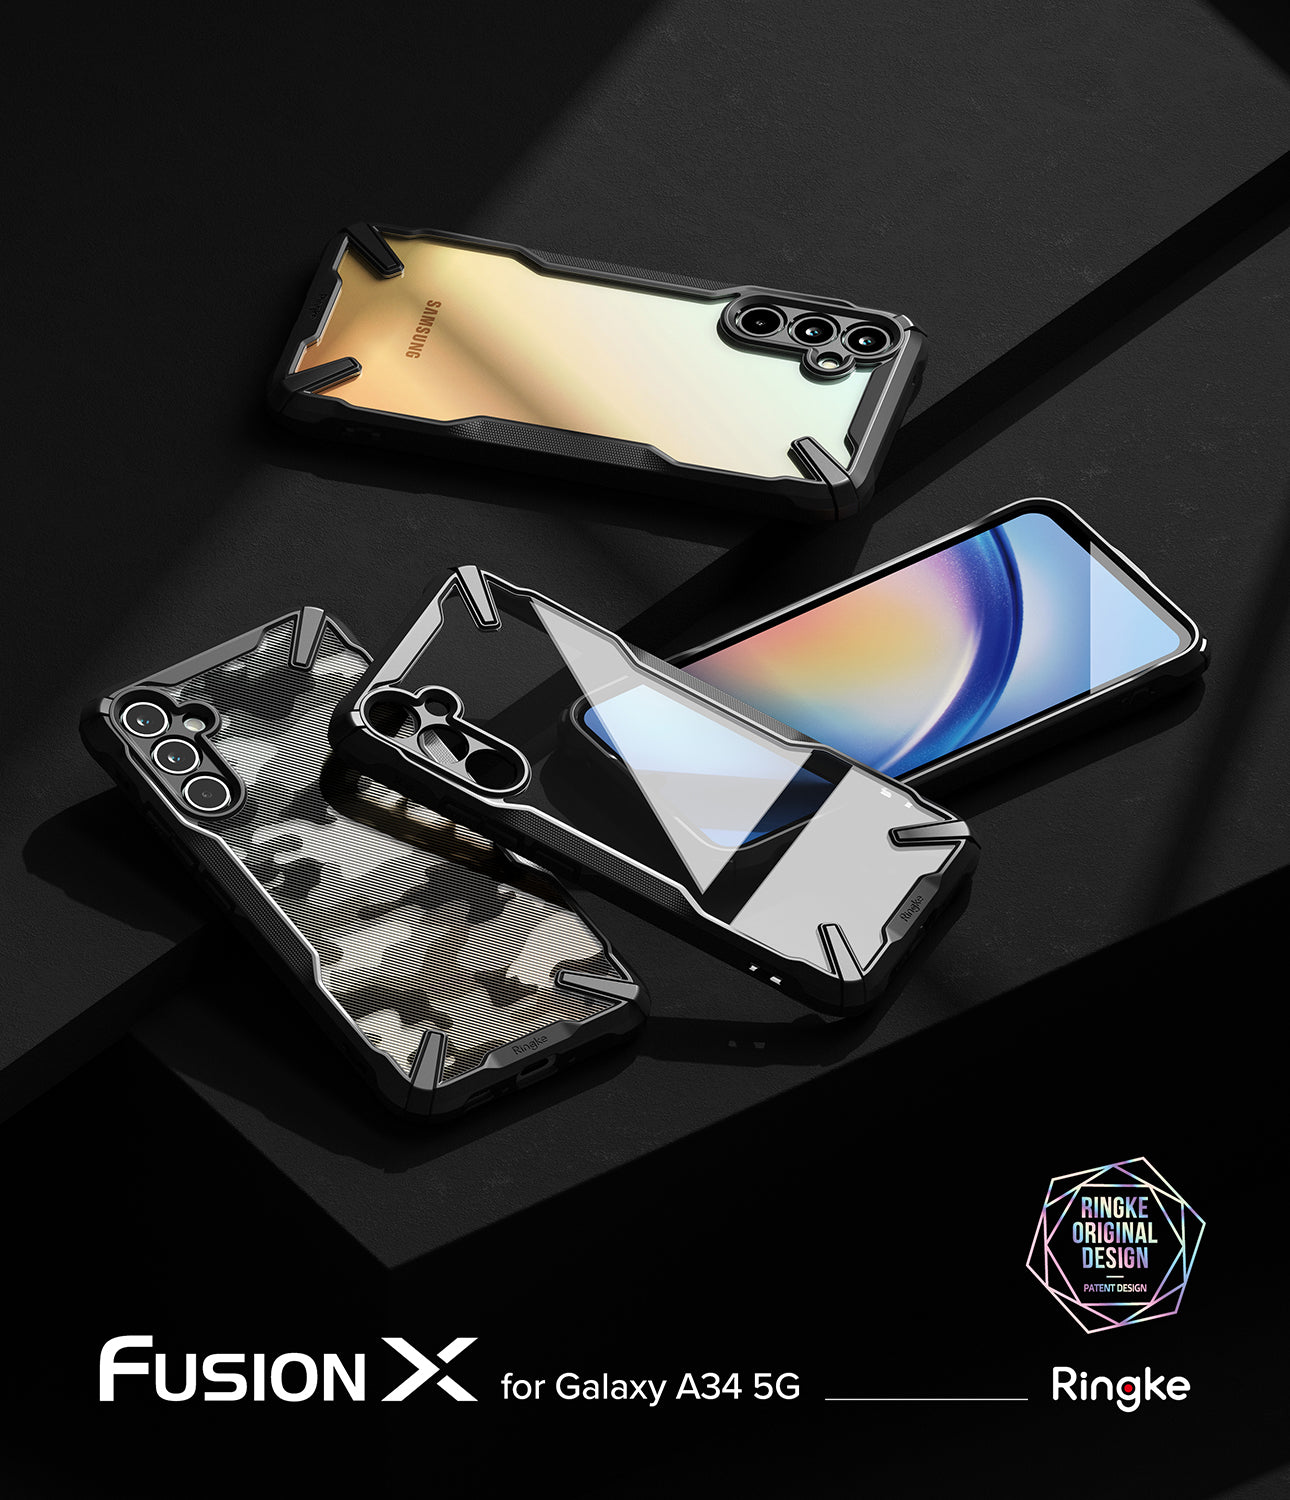 Fusion X for Galaxy A34 5G